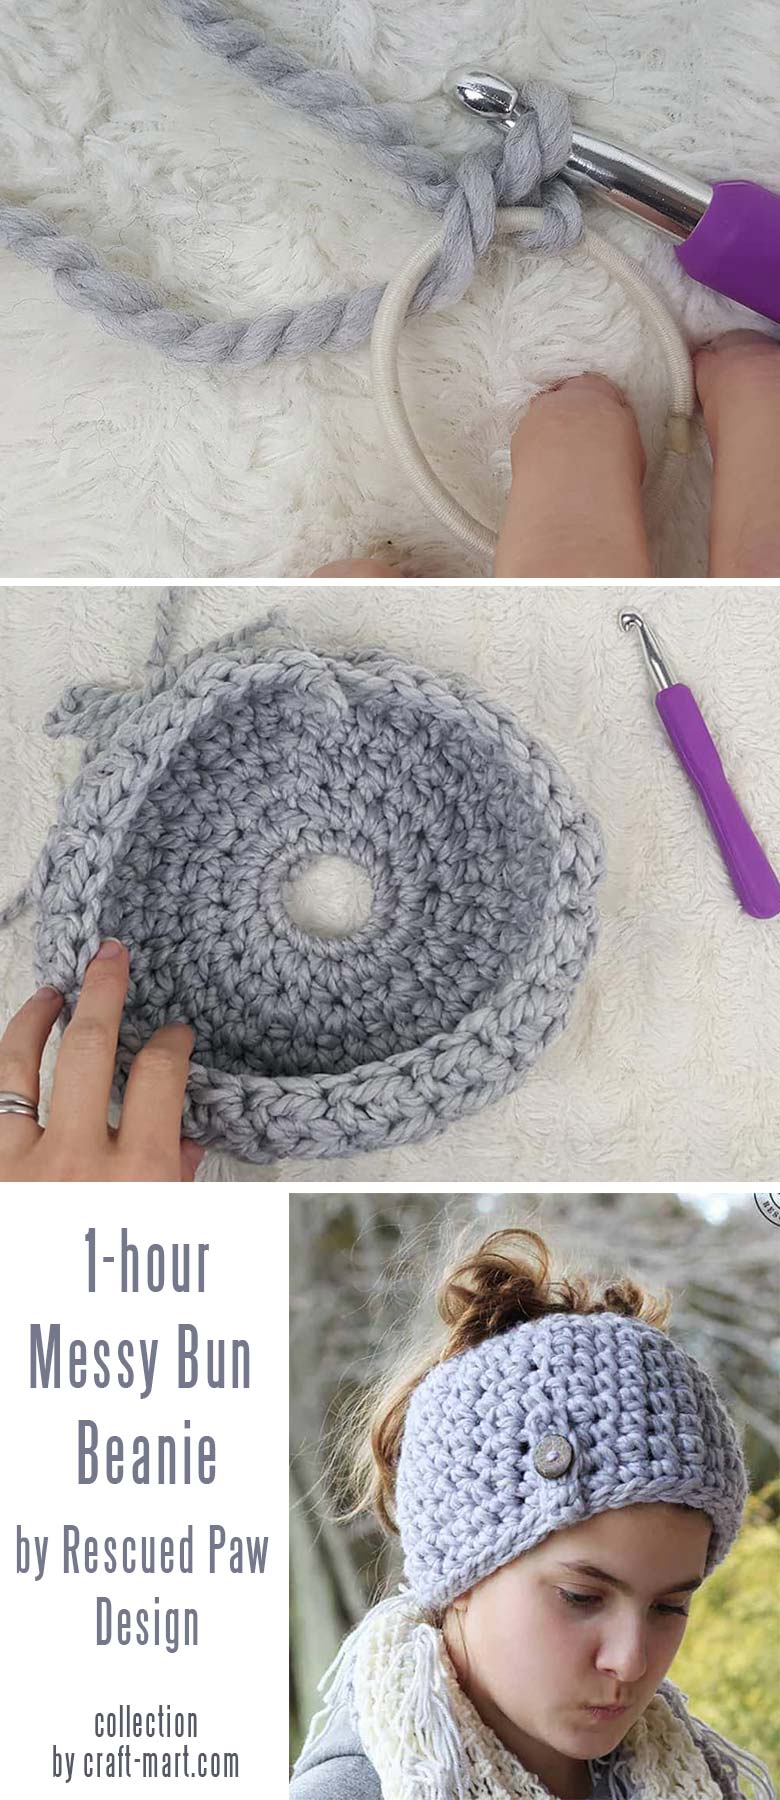 Learn to crochet a messy bun hat with 12 free patterns and tutorials - 1 Hour Crochet Messy Bun Beanie Pattern by Rescued Paw Designs #messybunhat #messybunbeanie #messybunhatpattern #freepatternmessybunhat #messybunbeaniecrochet